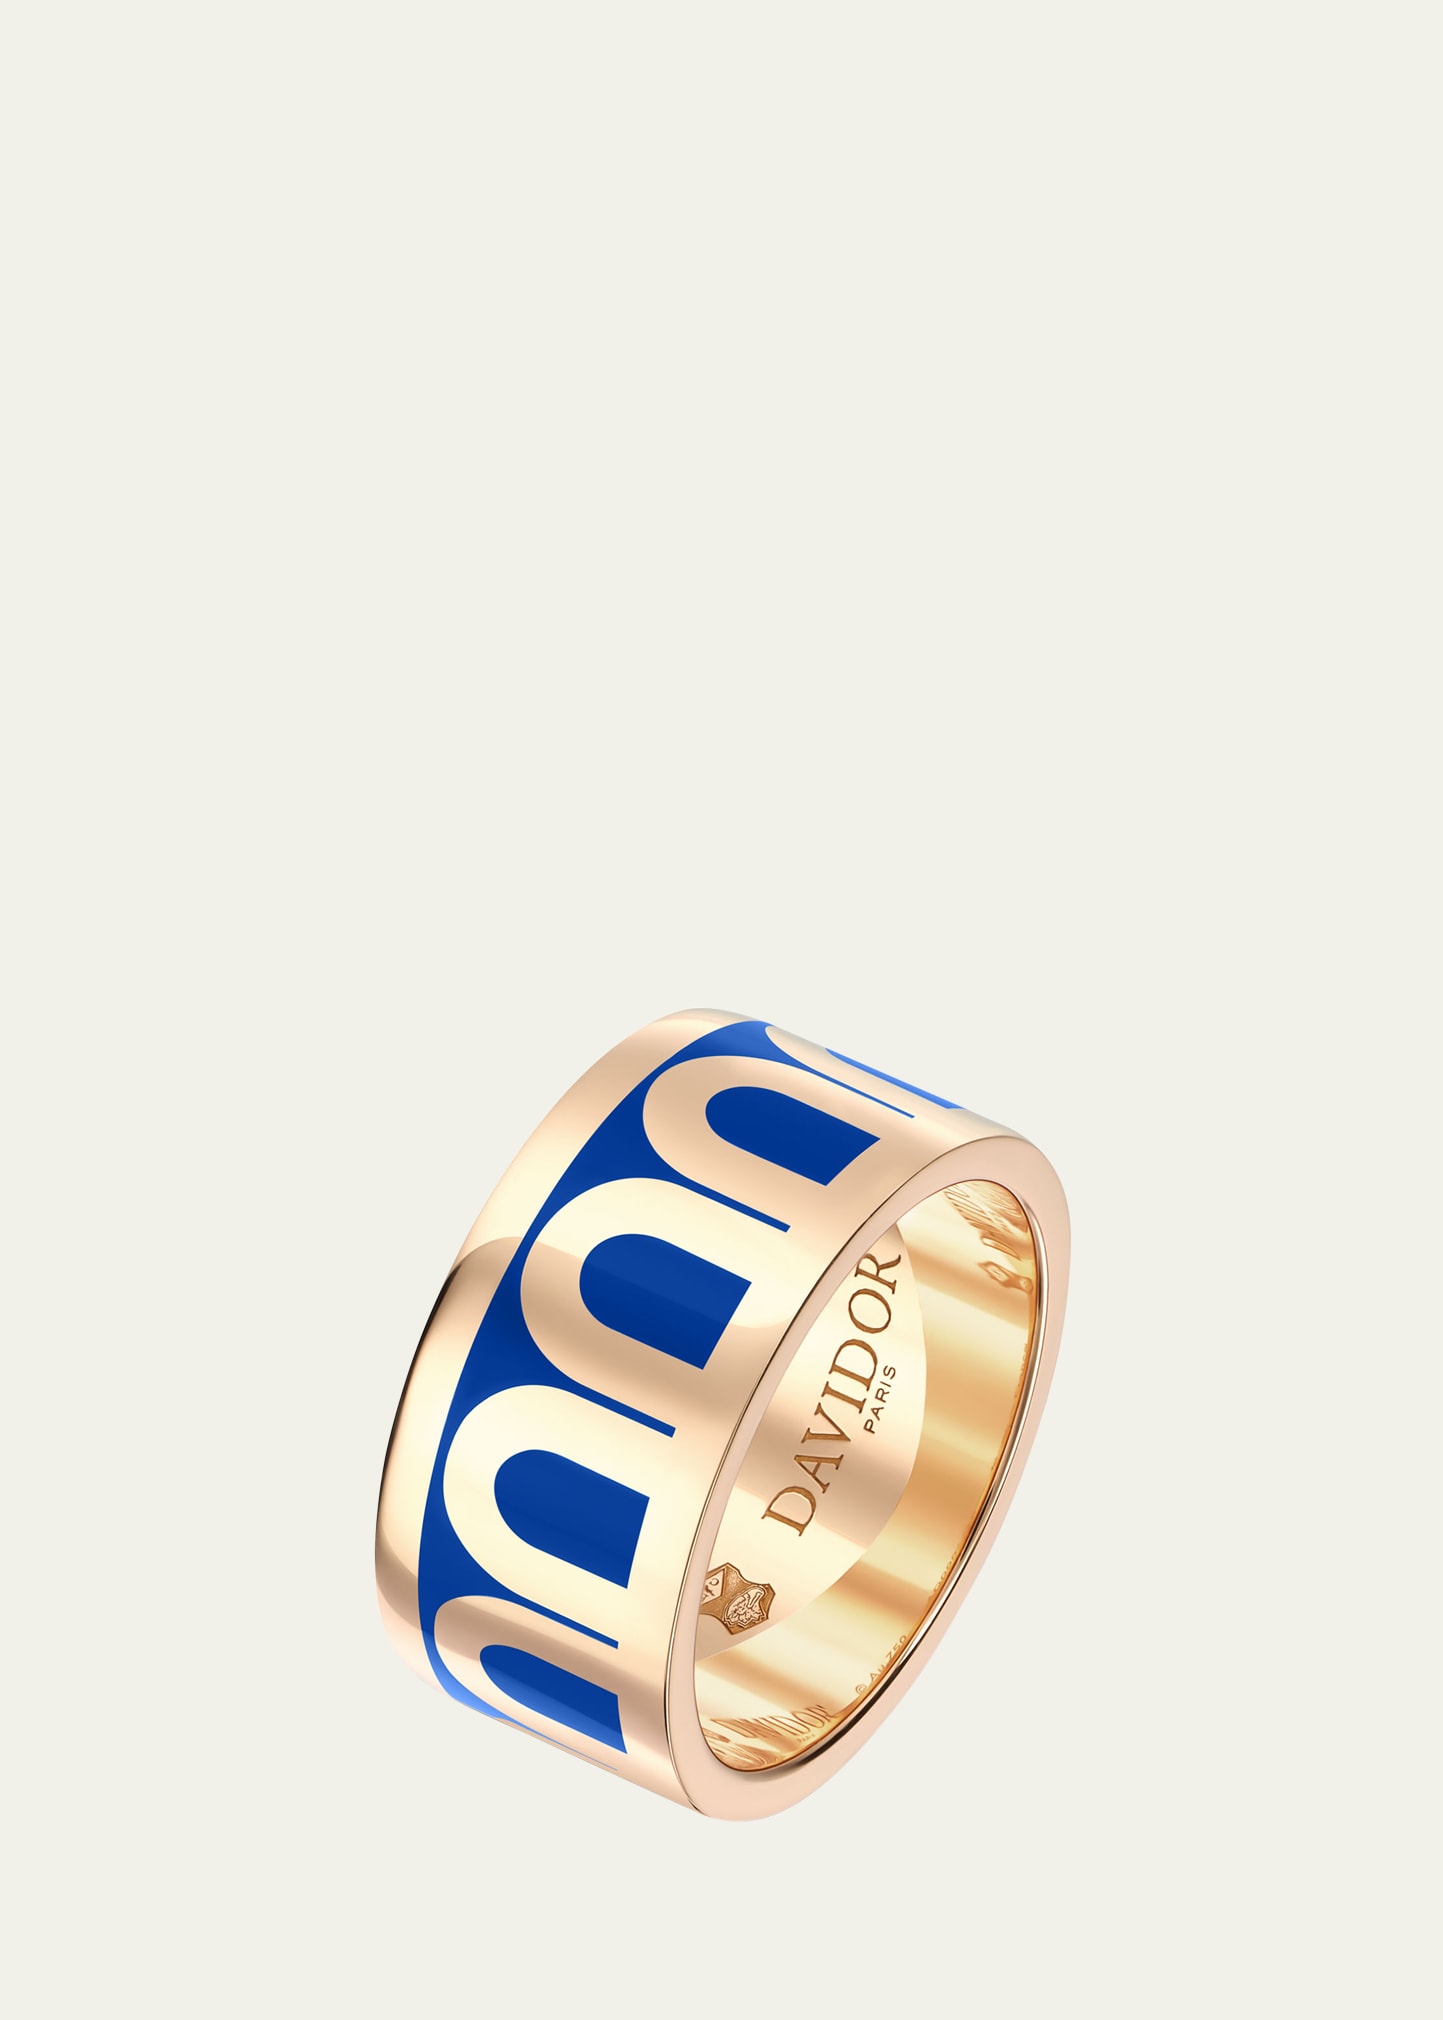 Davidor L'arc De  Ring Gm In 18k Rose Gold With Riviera Lacquered Ceramic